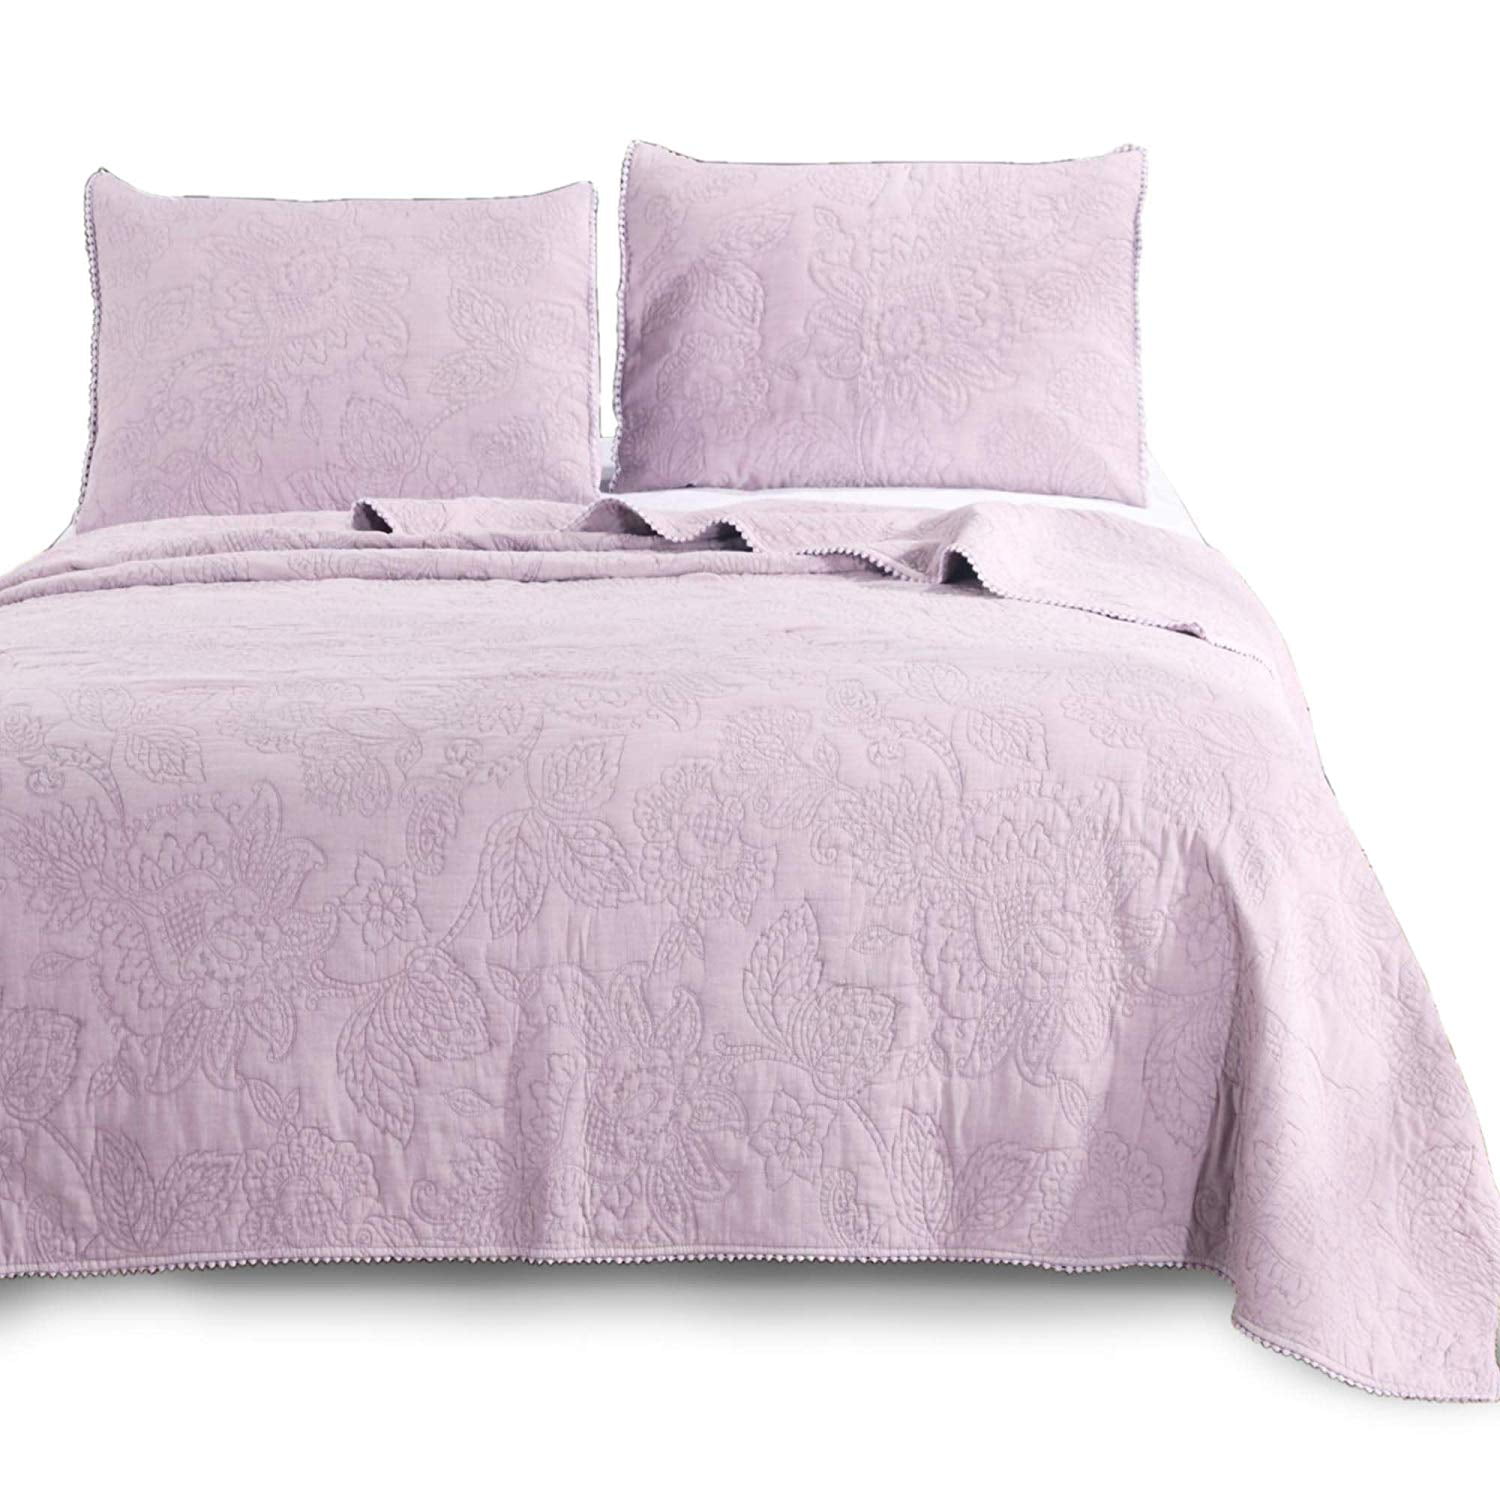 100% Cotton Ult Details about   KASENTEX Stone Washed Quilted Coverlet Set with 2 Standard Sham 